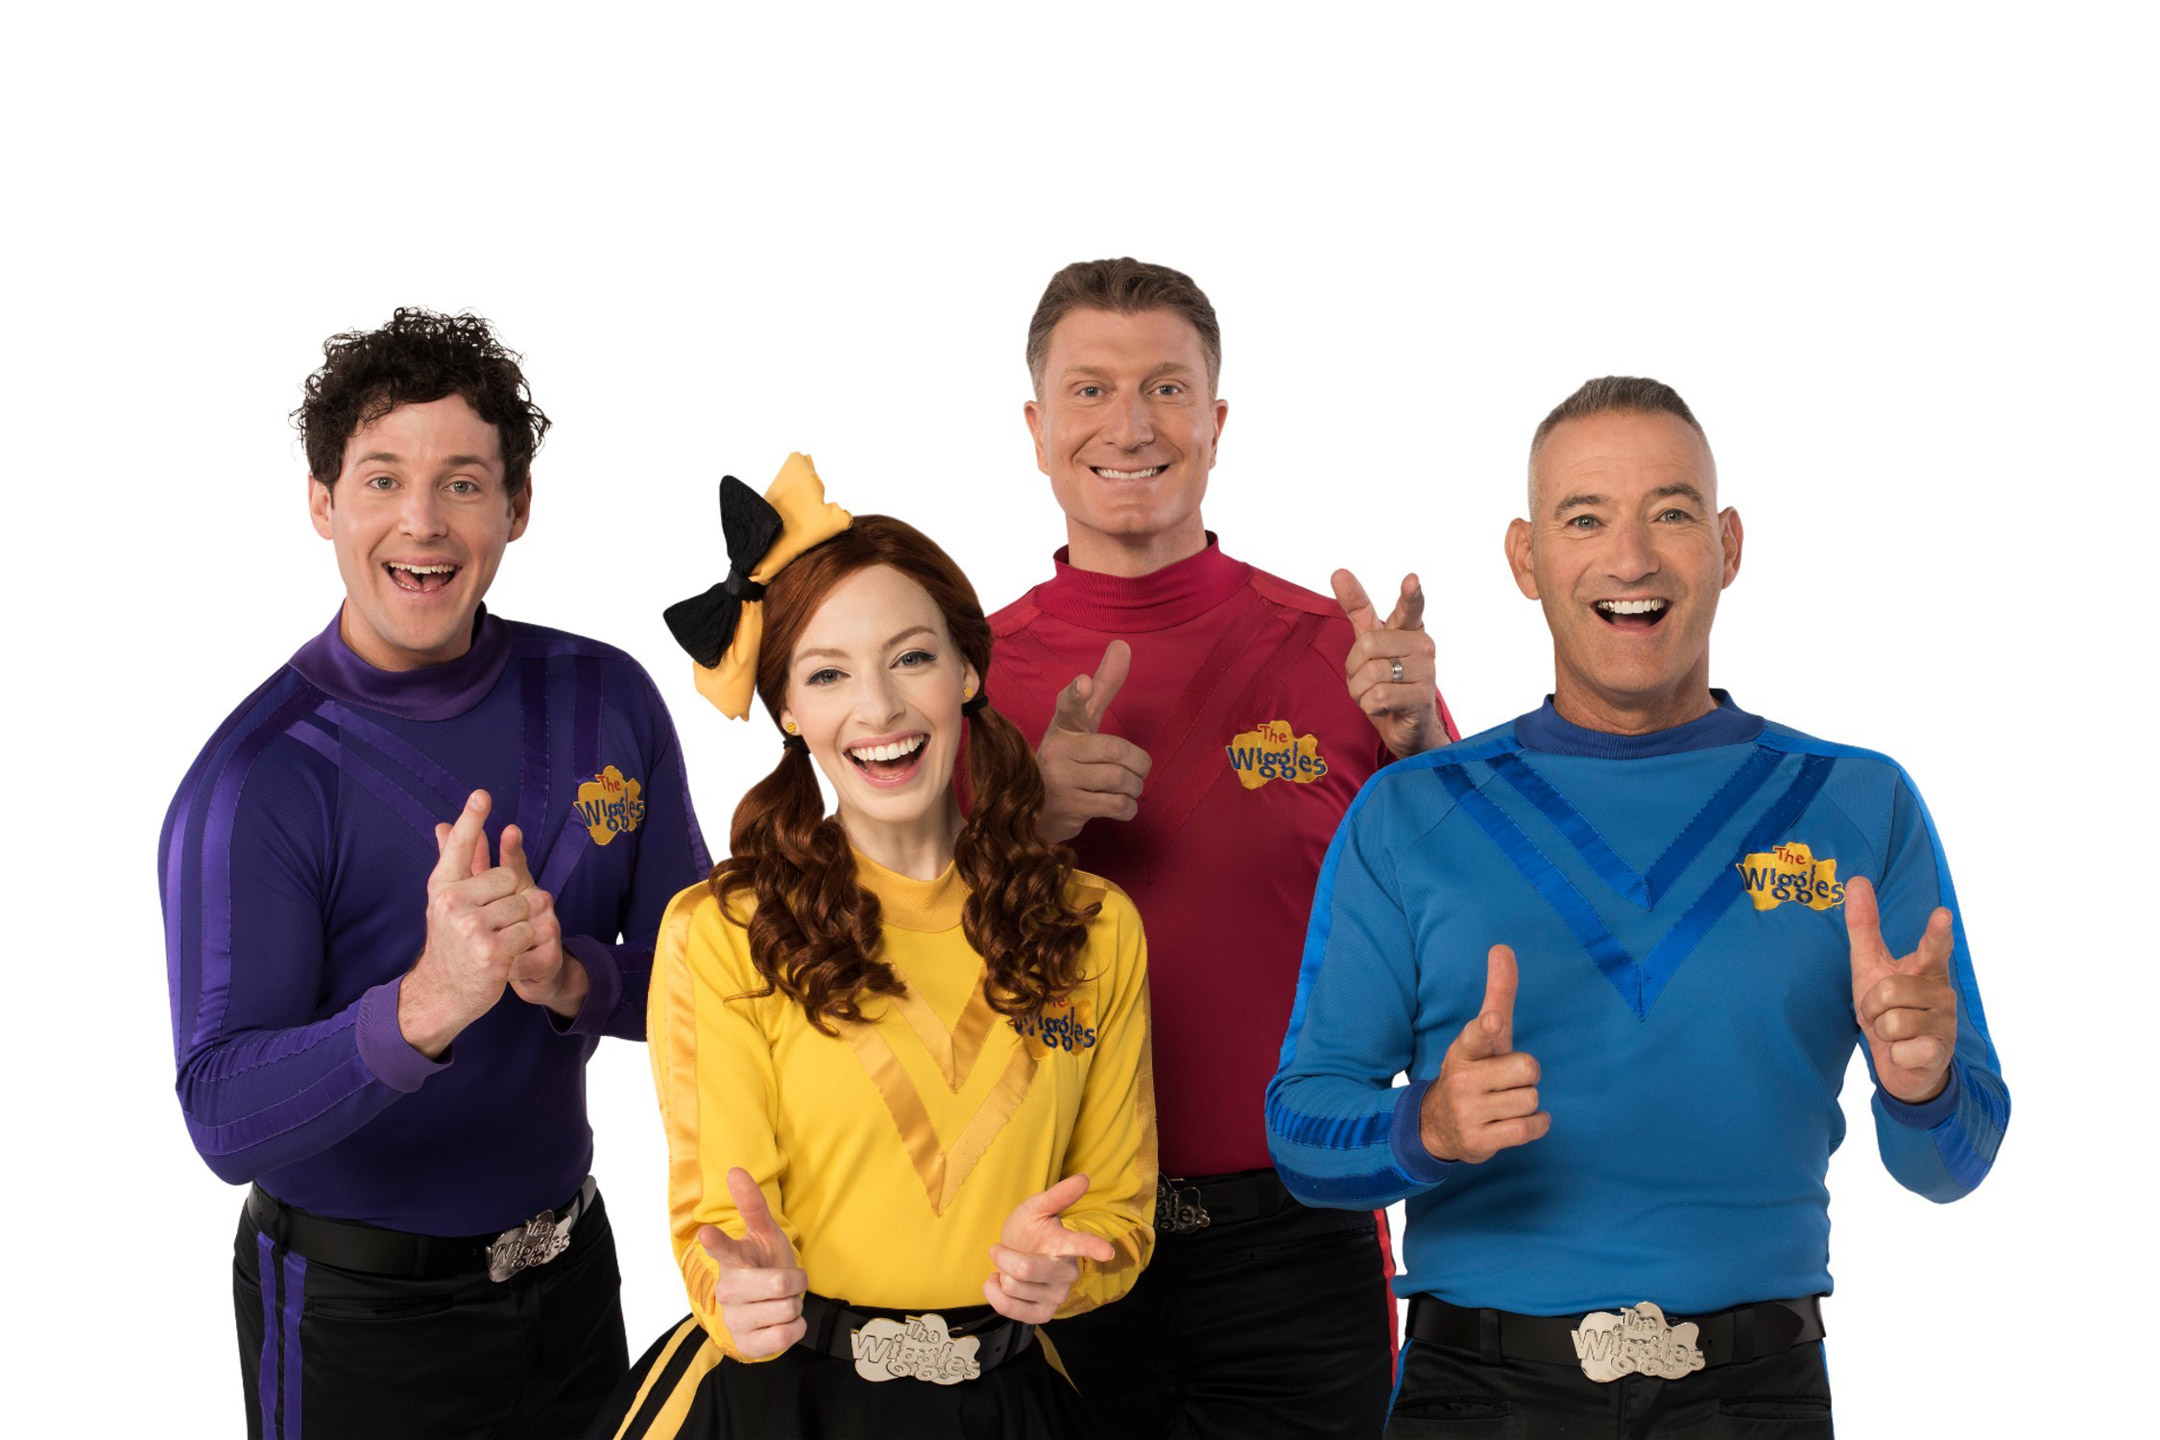 The Wiggles launch Wiggles TV and add new cast members • CHILD Mag...